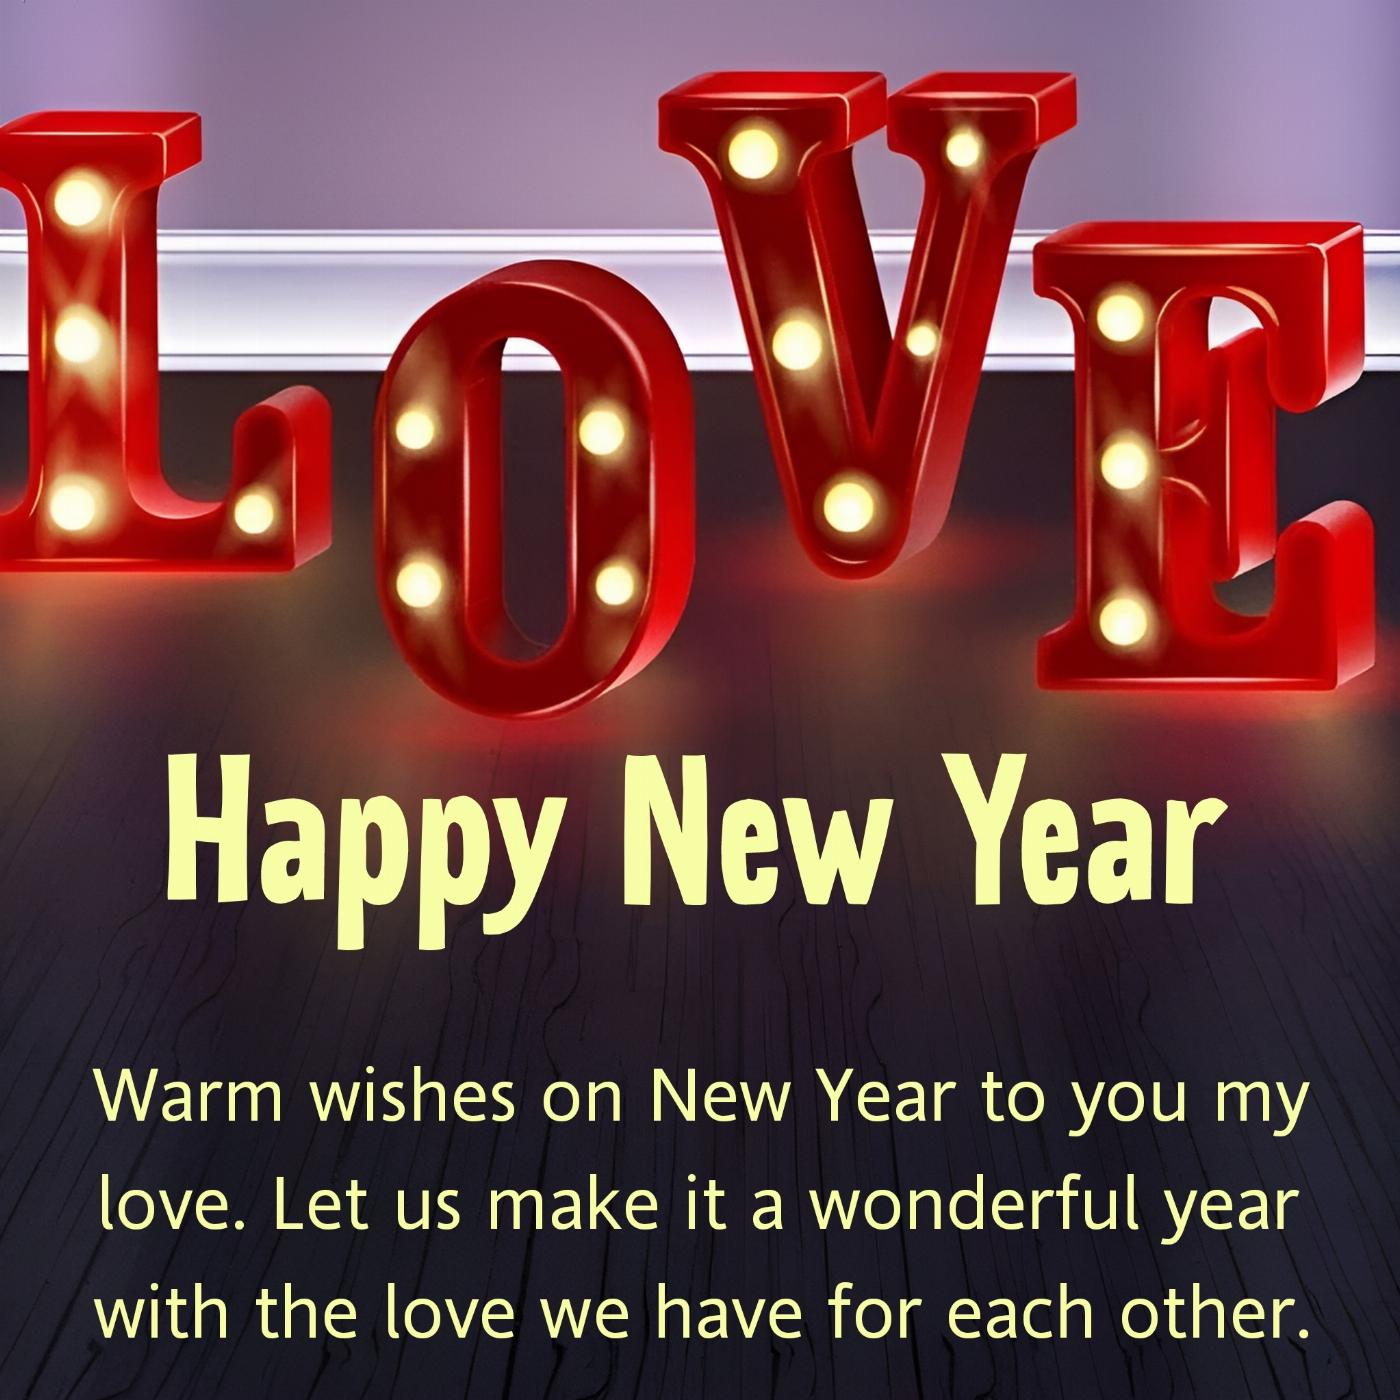 Warm wishes on New Year to you my love